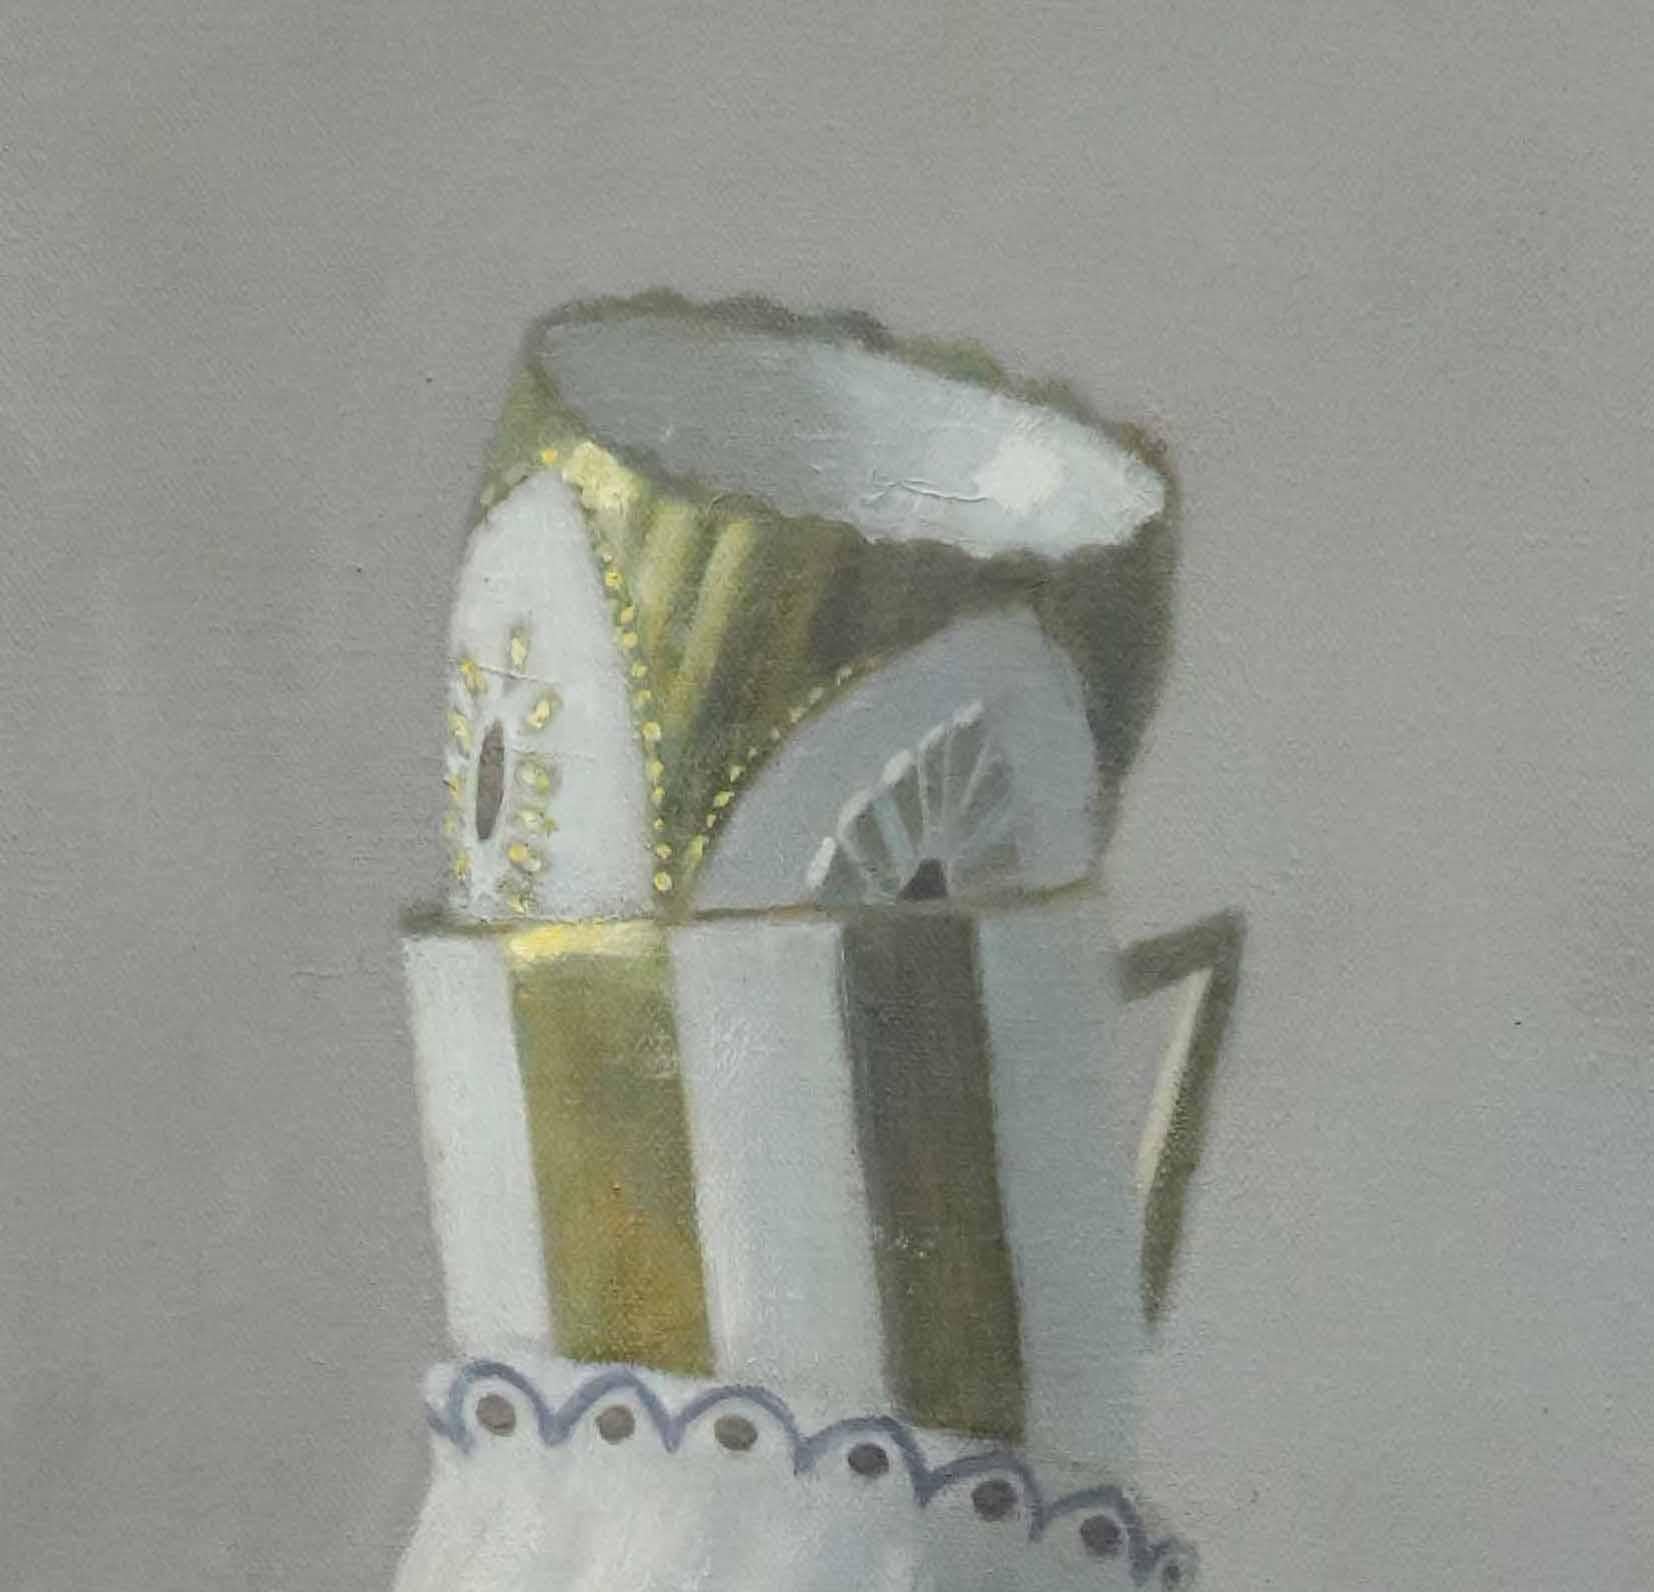 Tower of White and Gold Teacups, Contemporary Still Life, Porcelain, Antique - Gray Still-Life Painting by Olga Antonova